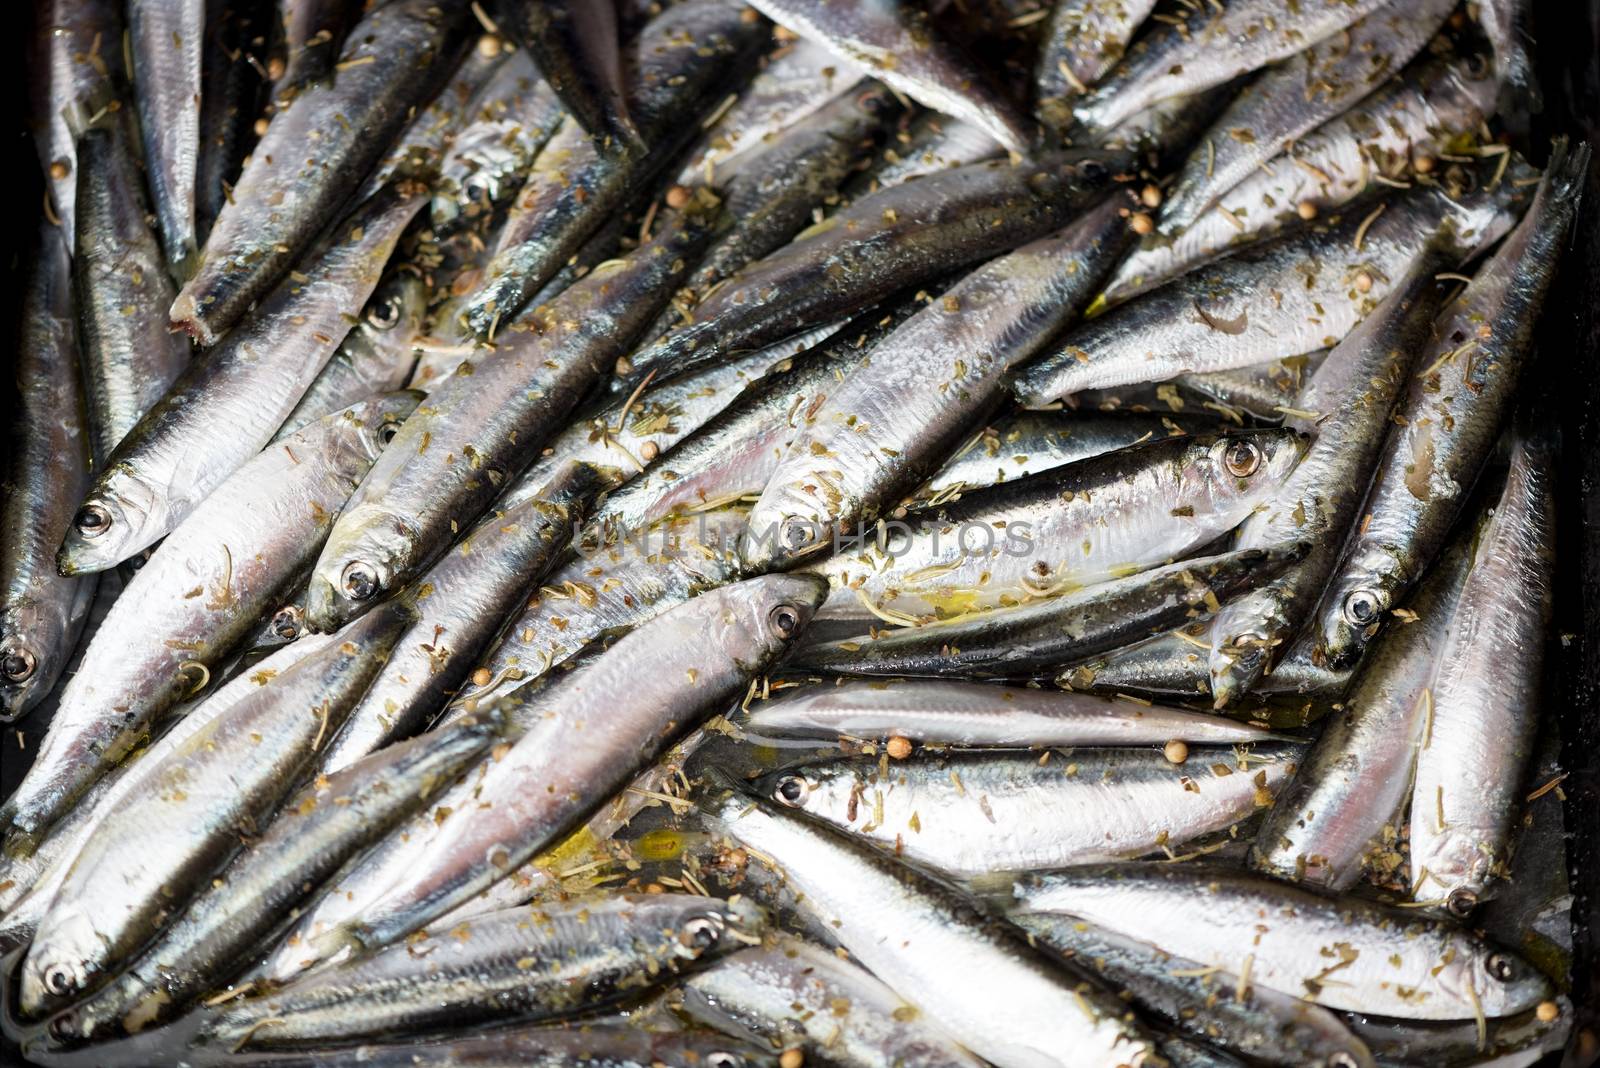 Fresh Smelts preparation for frying. Close-up